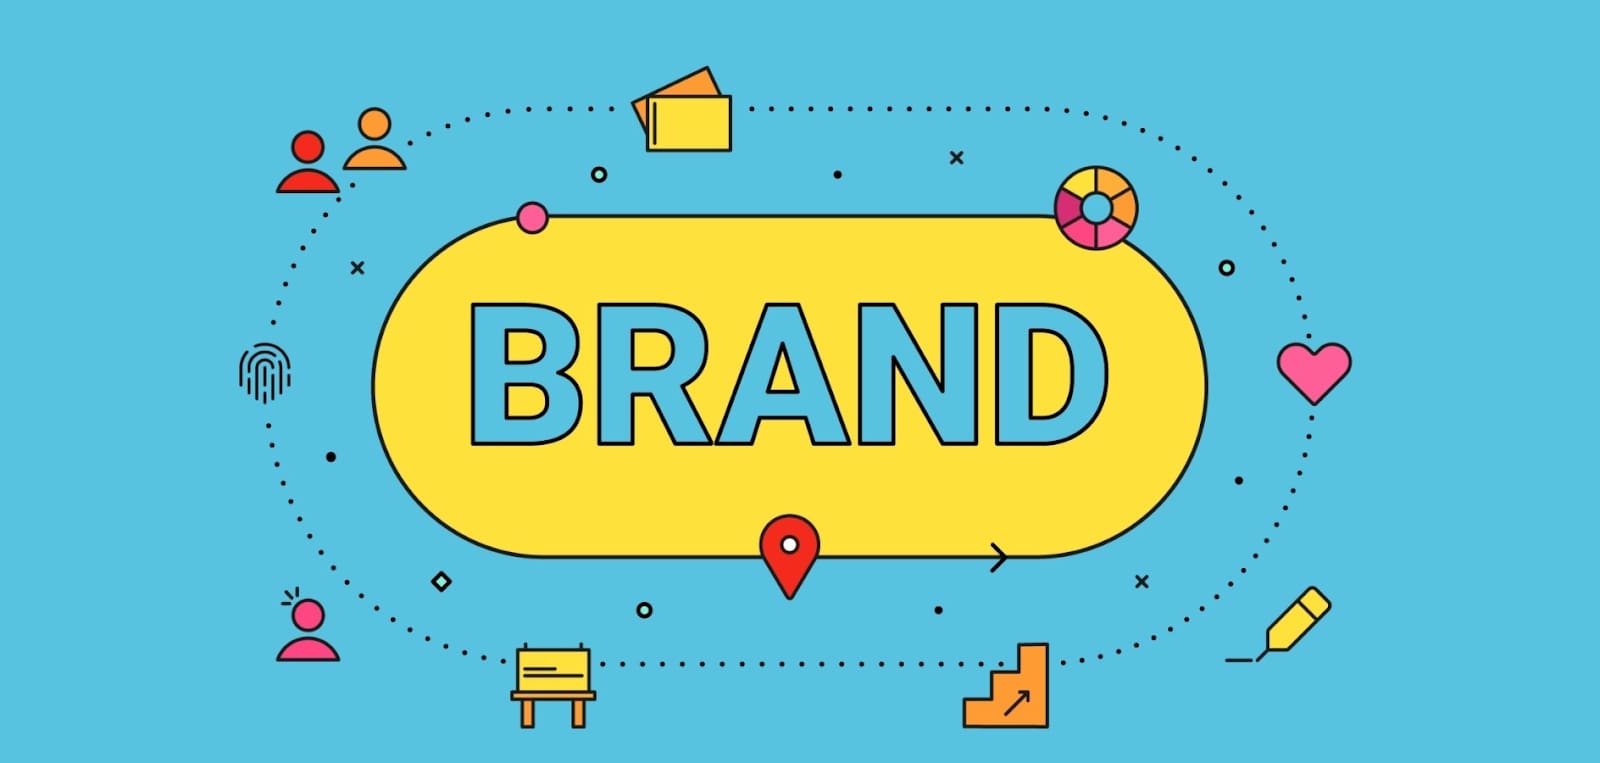 Apply the branding across your business